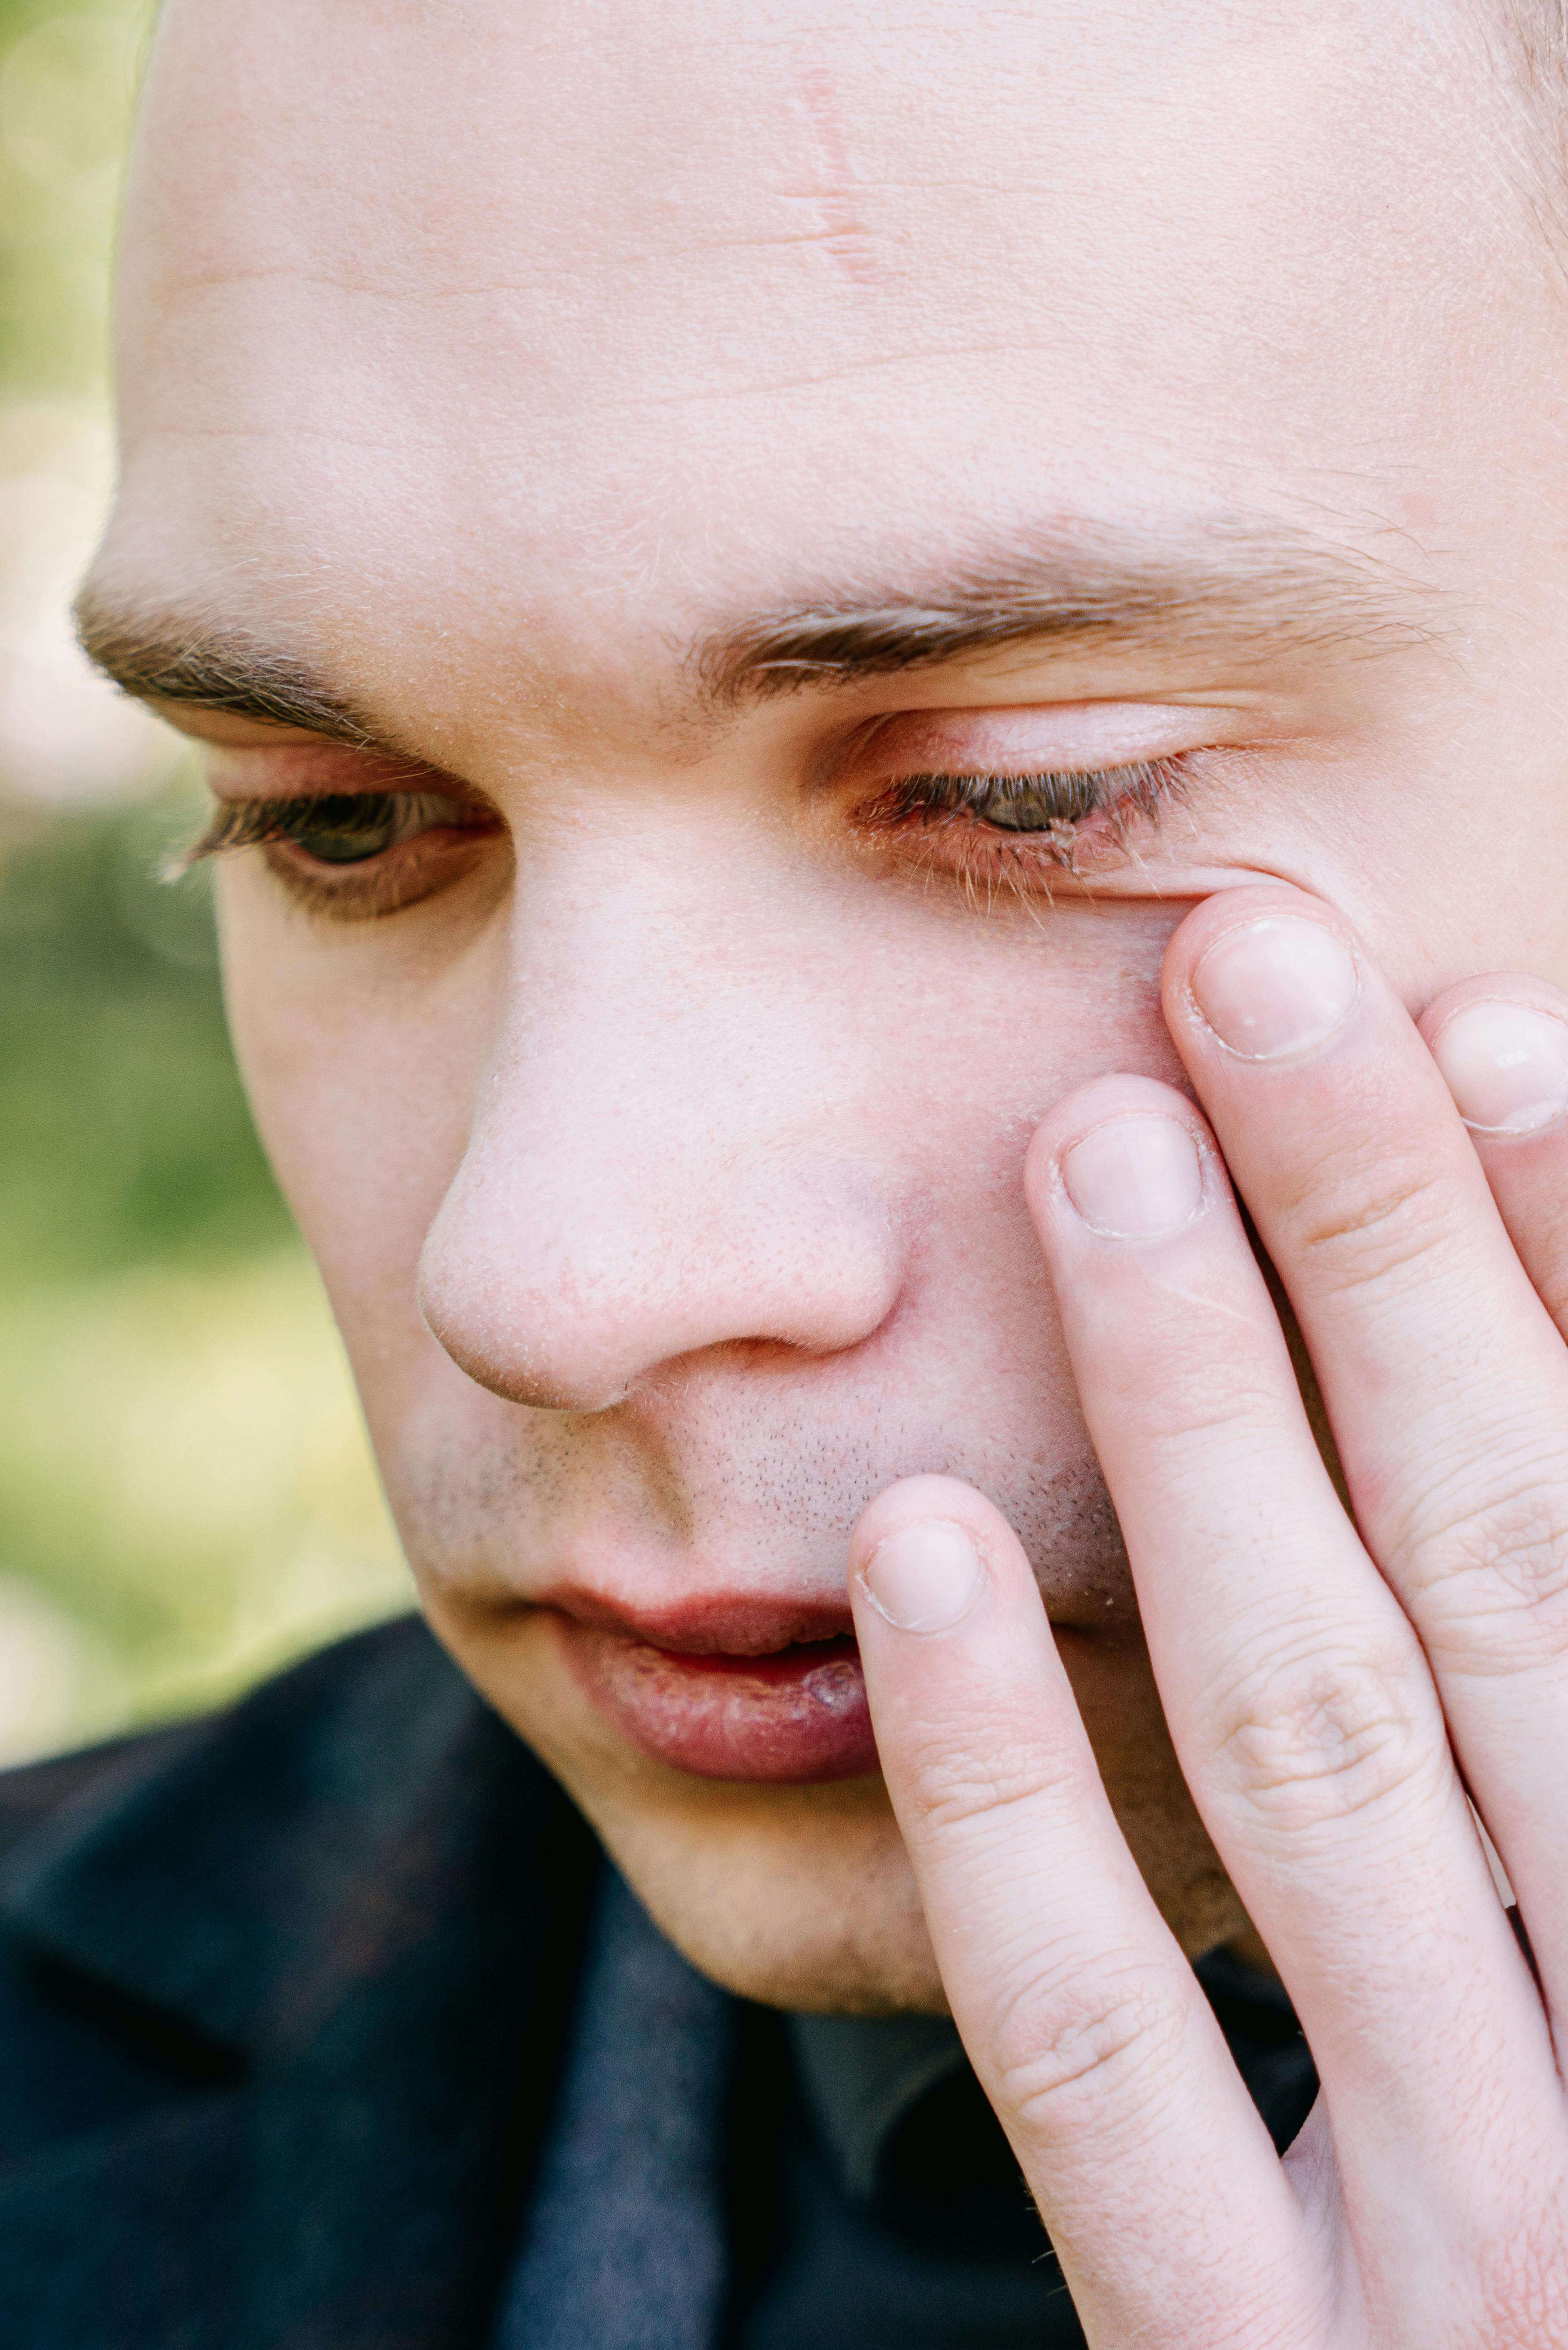 A man on the verge of tears | Source: Pexels